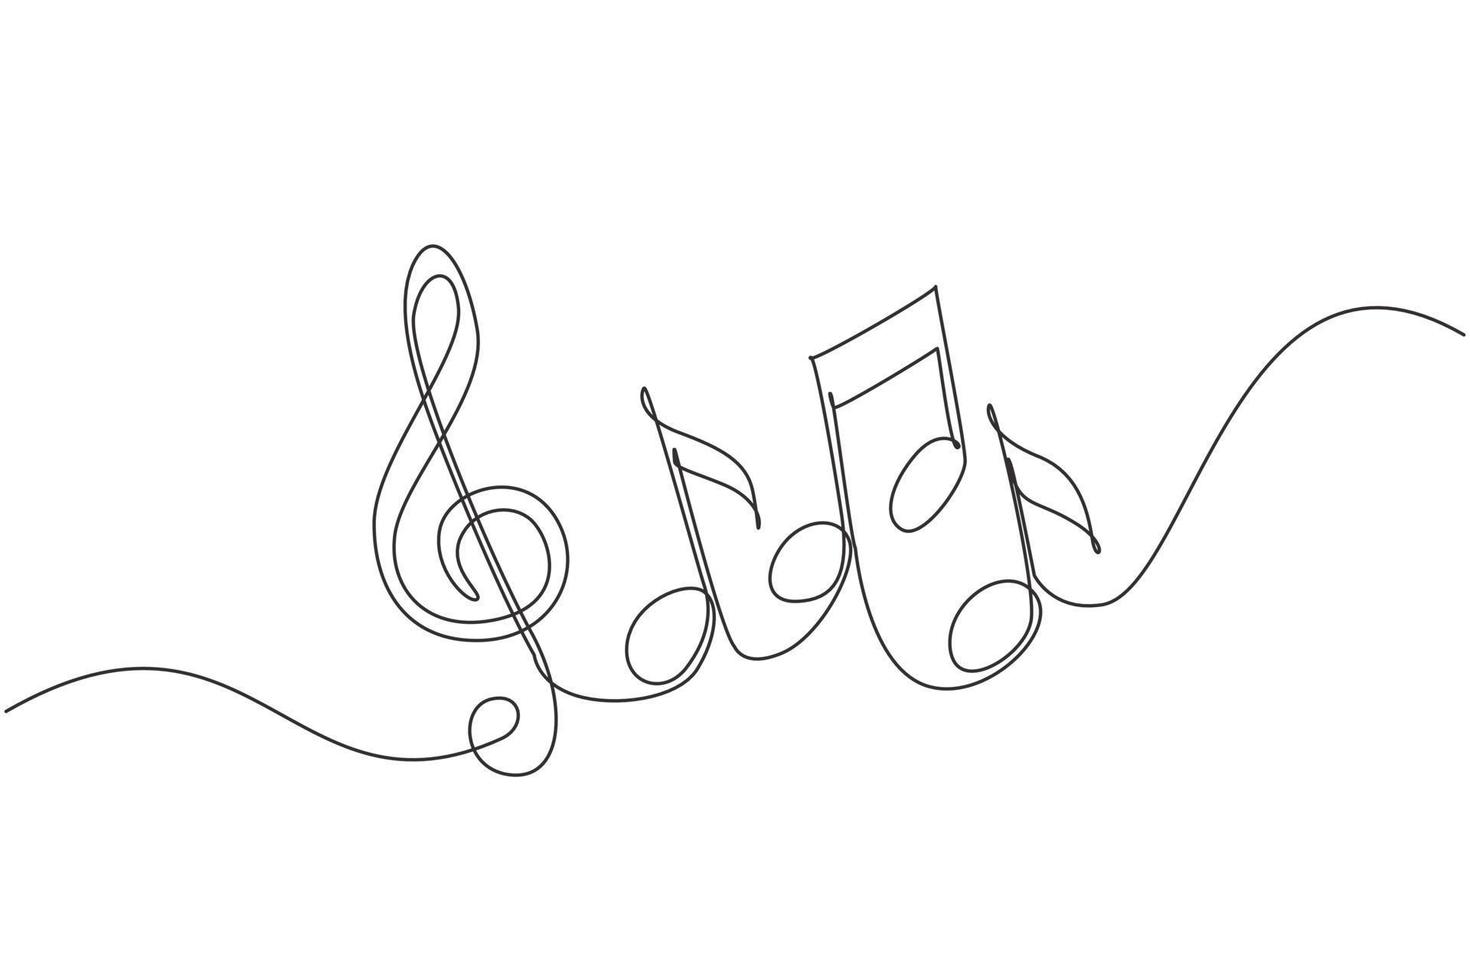 Continuous one line drawing music notes on stave. Musical symbol in one linear minimalist style. Trendy abstract wave melody. Vector outline sketch sound. Single line draw design graphic illustration